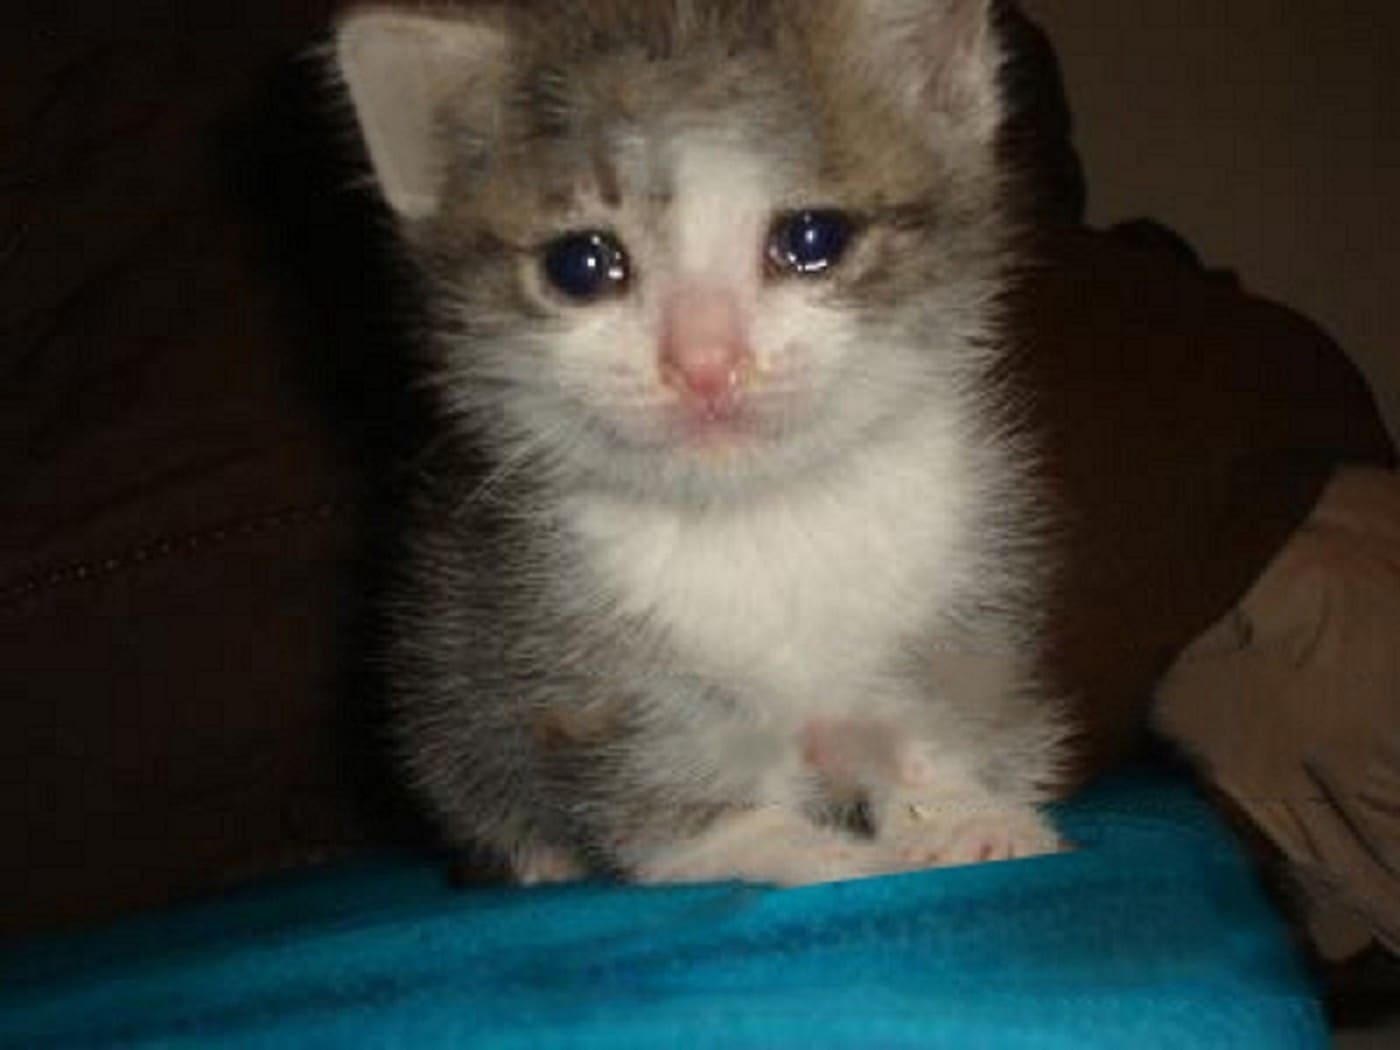 The best images of sad cats.